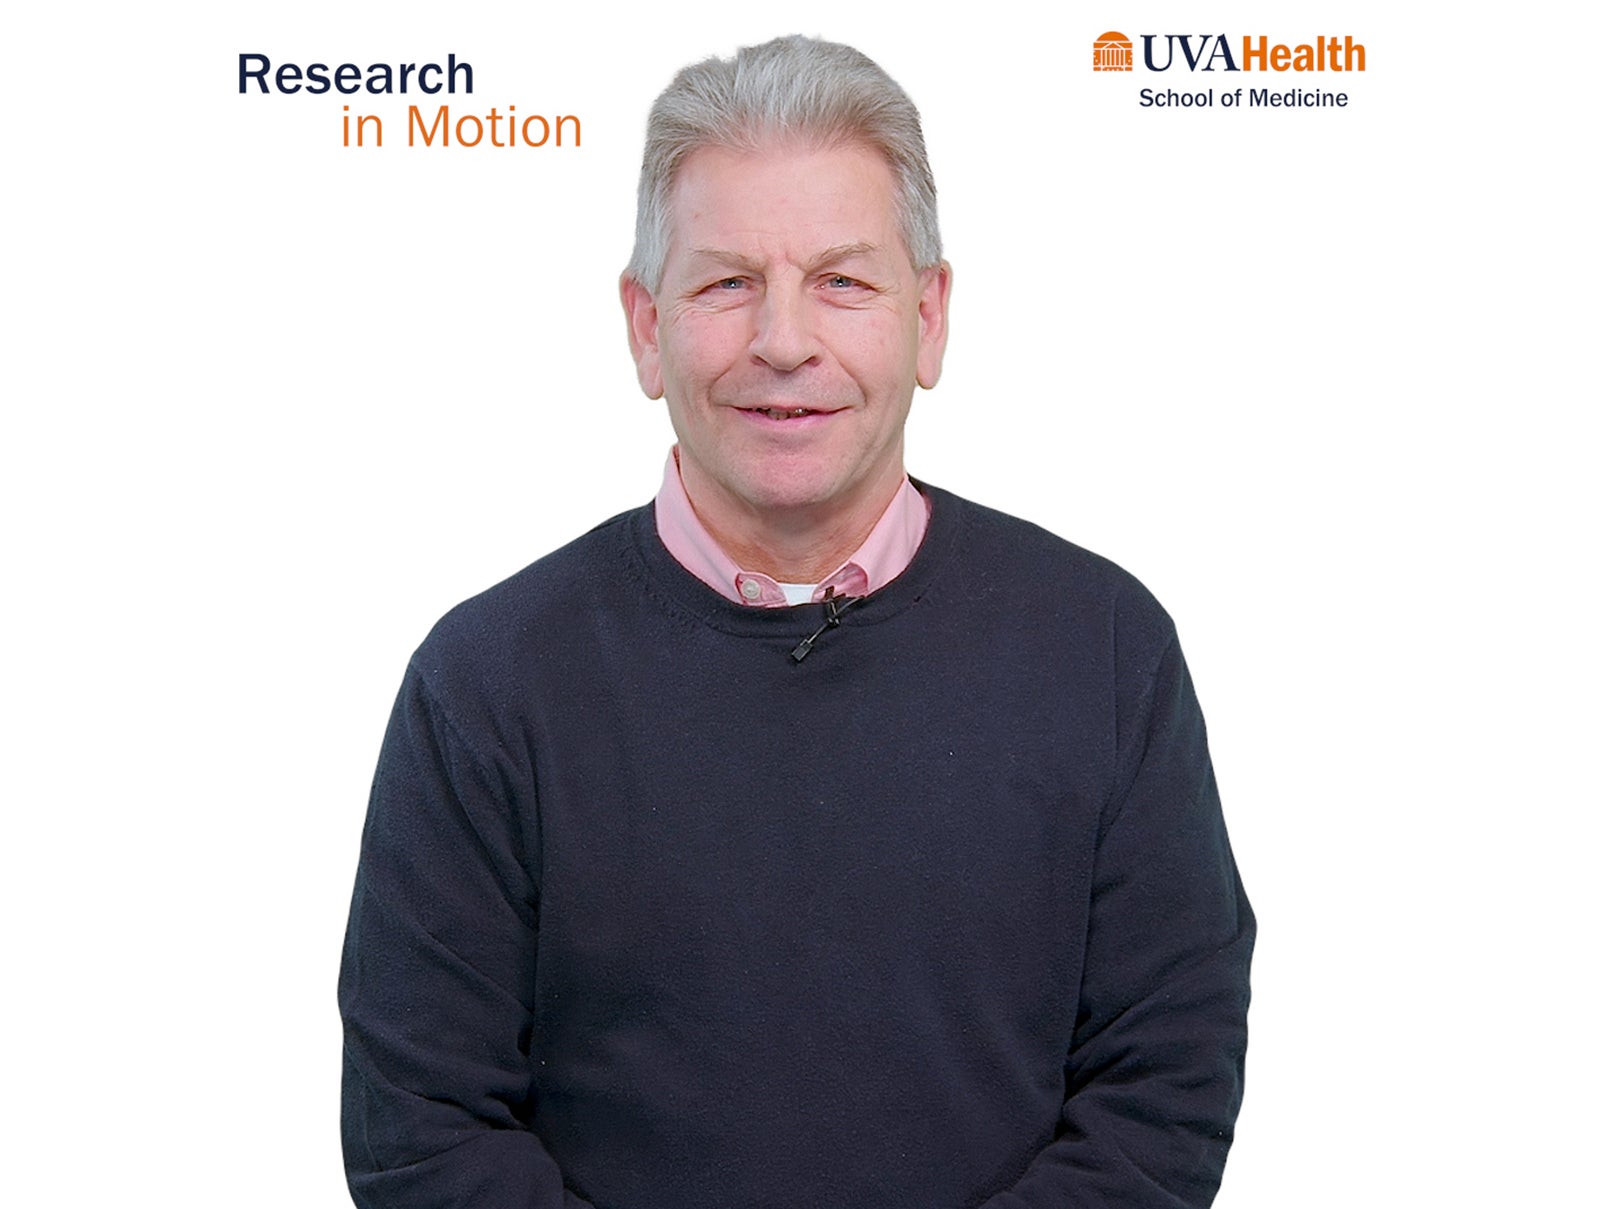 Research in Motion | Doug Bayliss, PhD - Connect